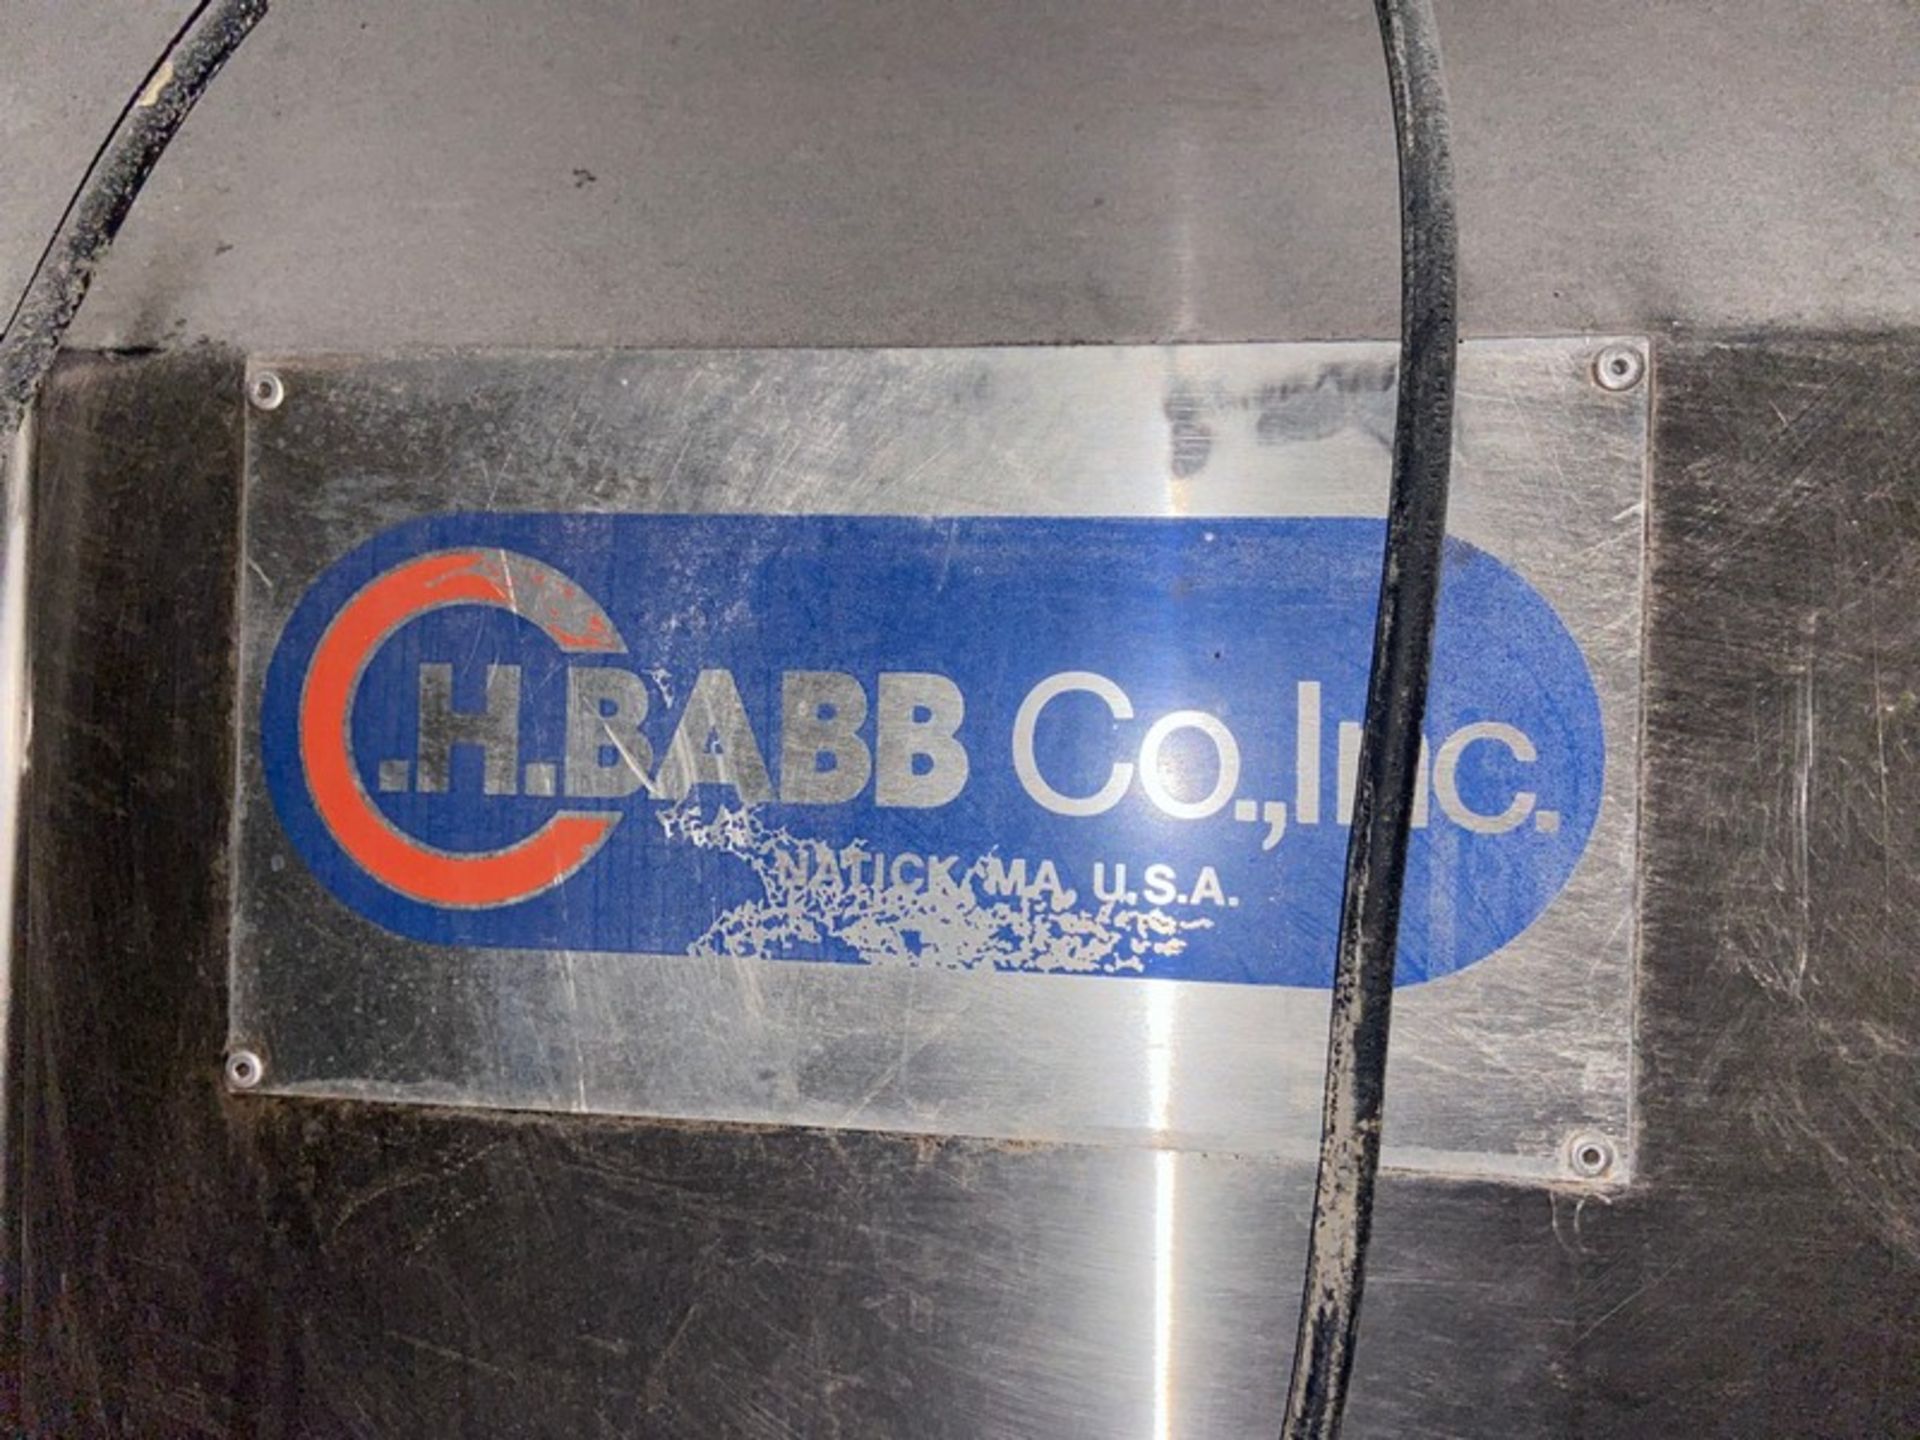 H. Babb Co. Inc. S/S Oven, with Aprox. 37" W Conveyor Belt, Product Opening: Aprox. 7" H (Top of - Image 5 of 13